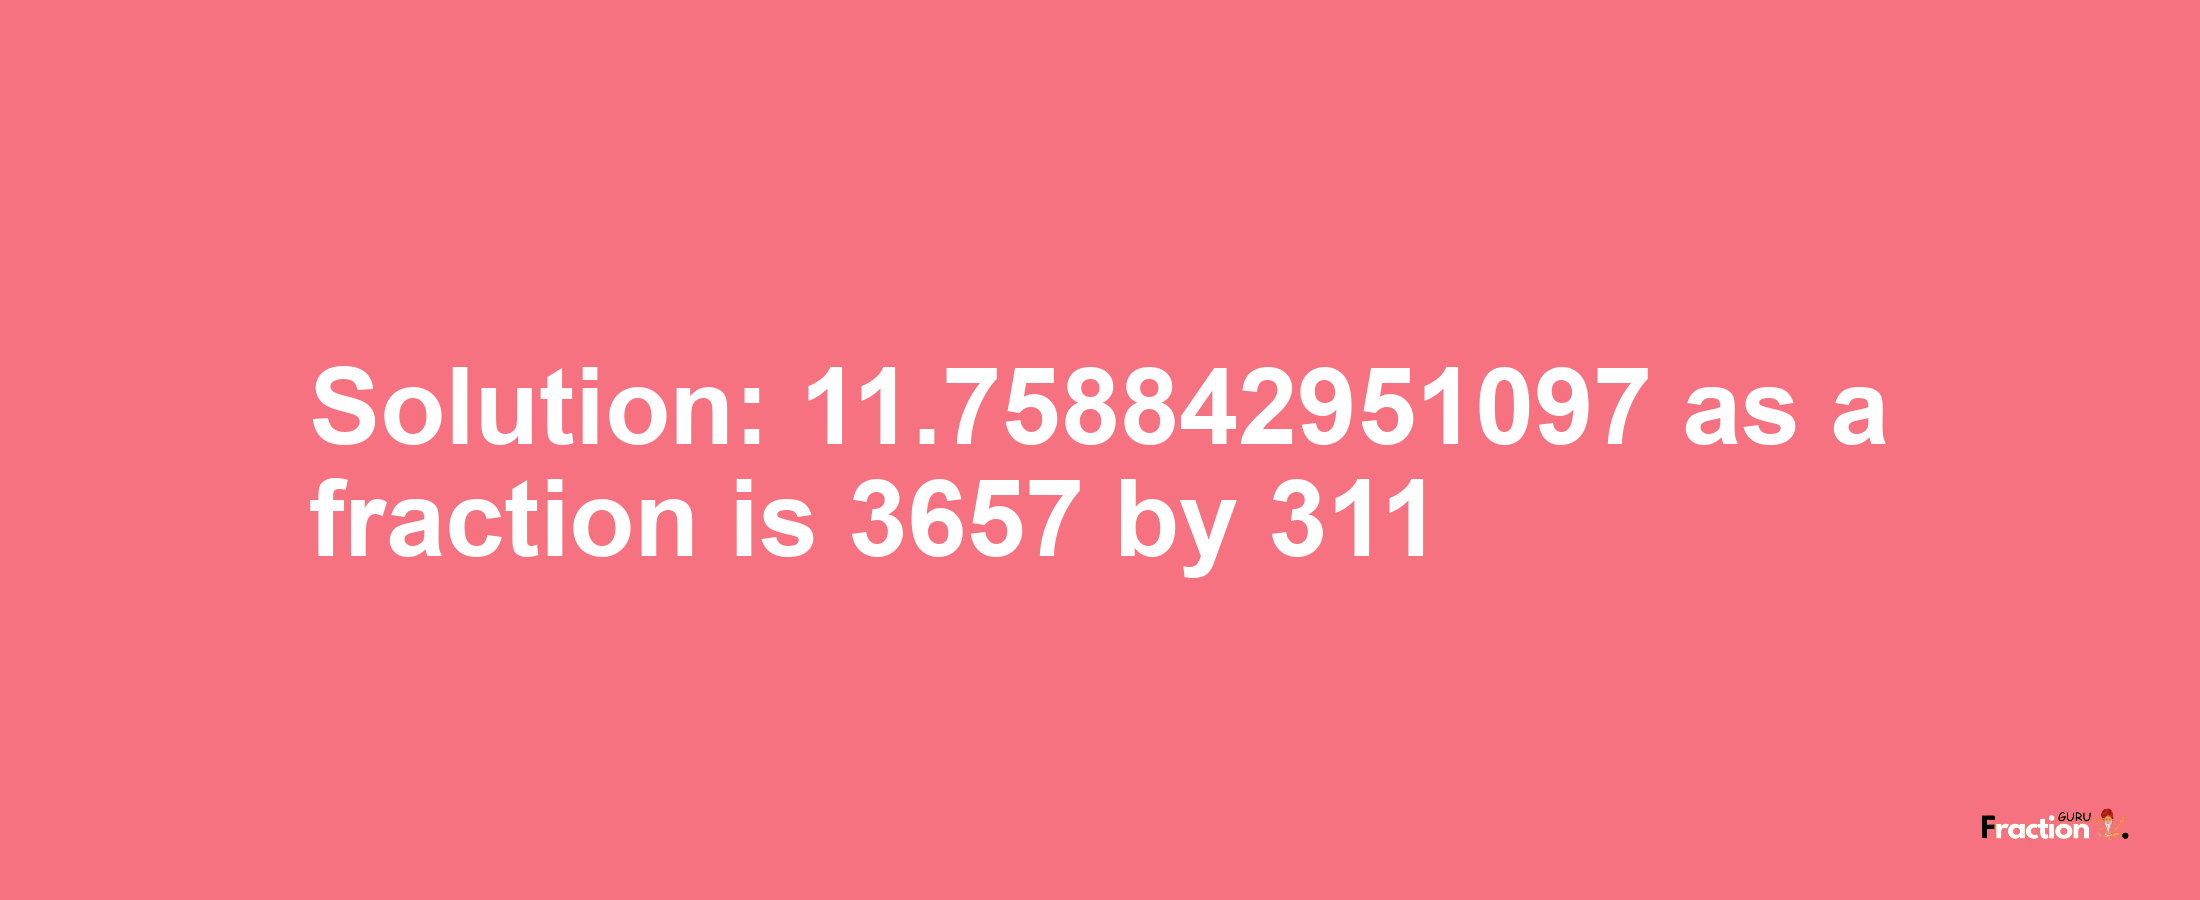 Solution:11.758842951097 as a fraction is 3657/311